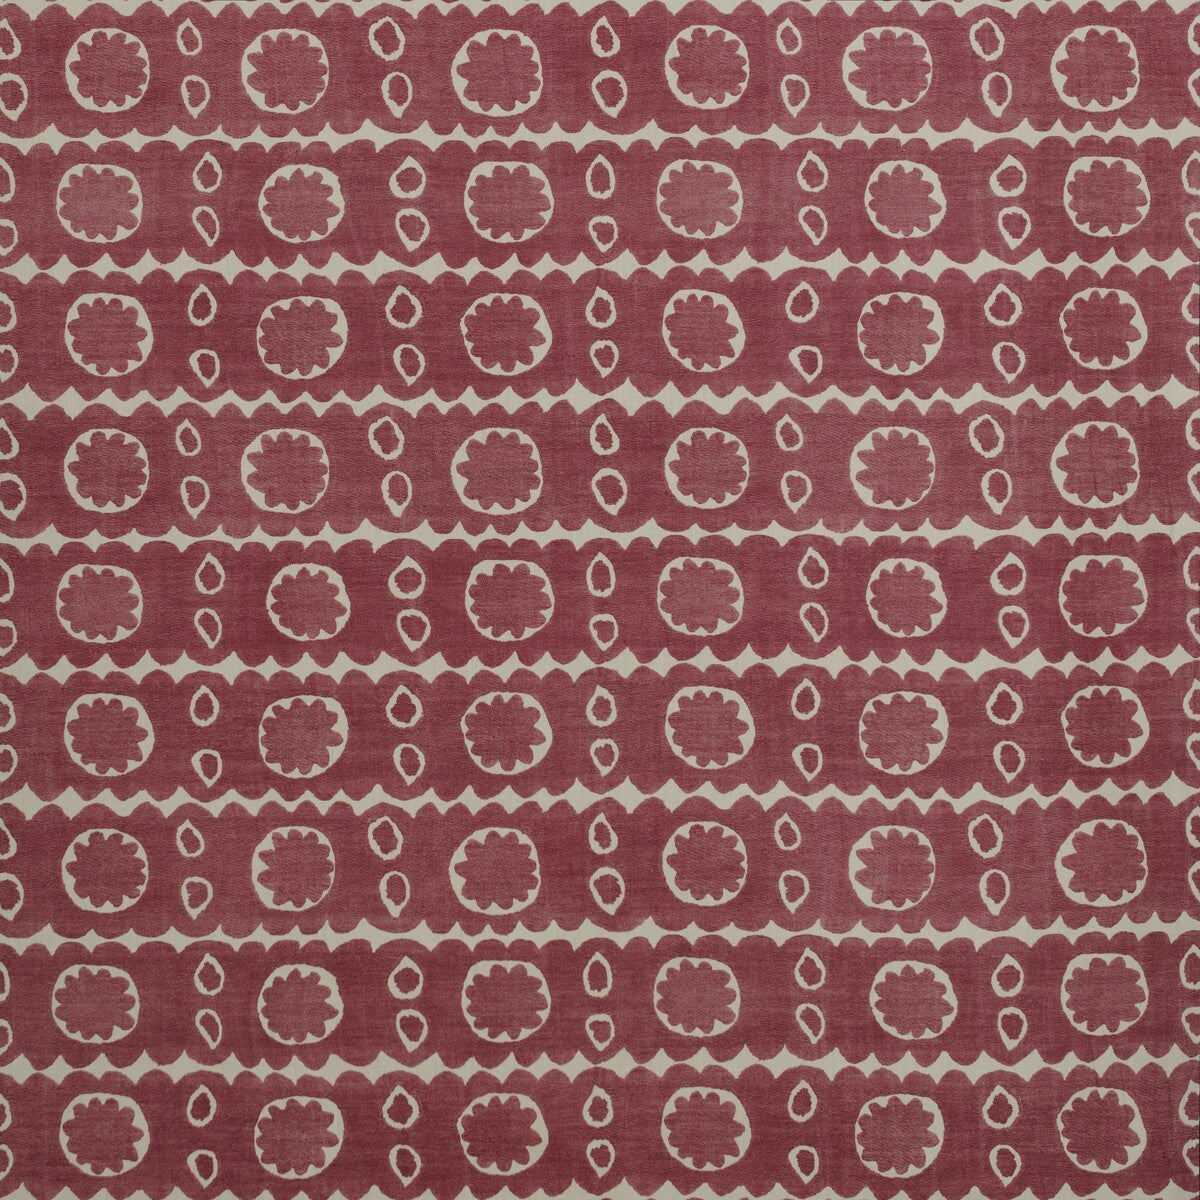 Osborne fabric in red color - pattern BFC-3653.119.0 - by Lee Jofa in the Blithfield collection